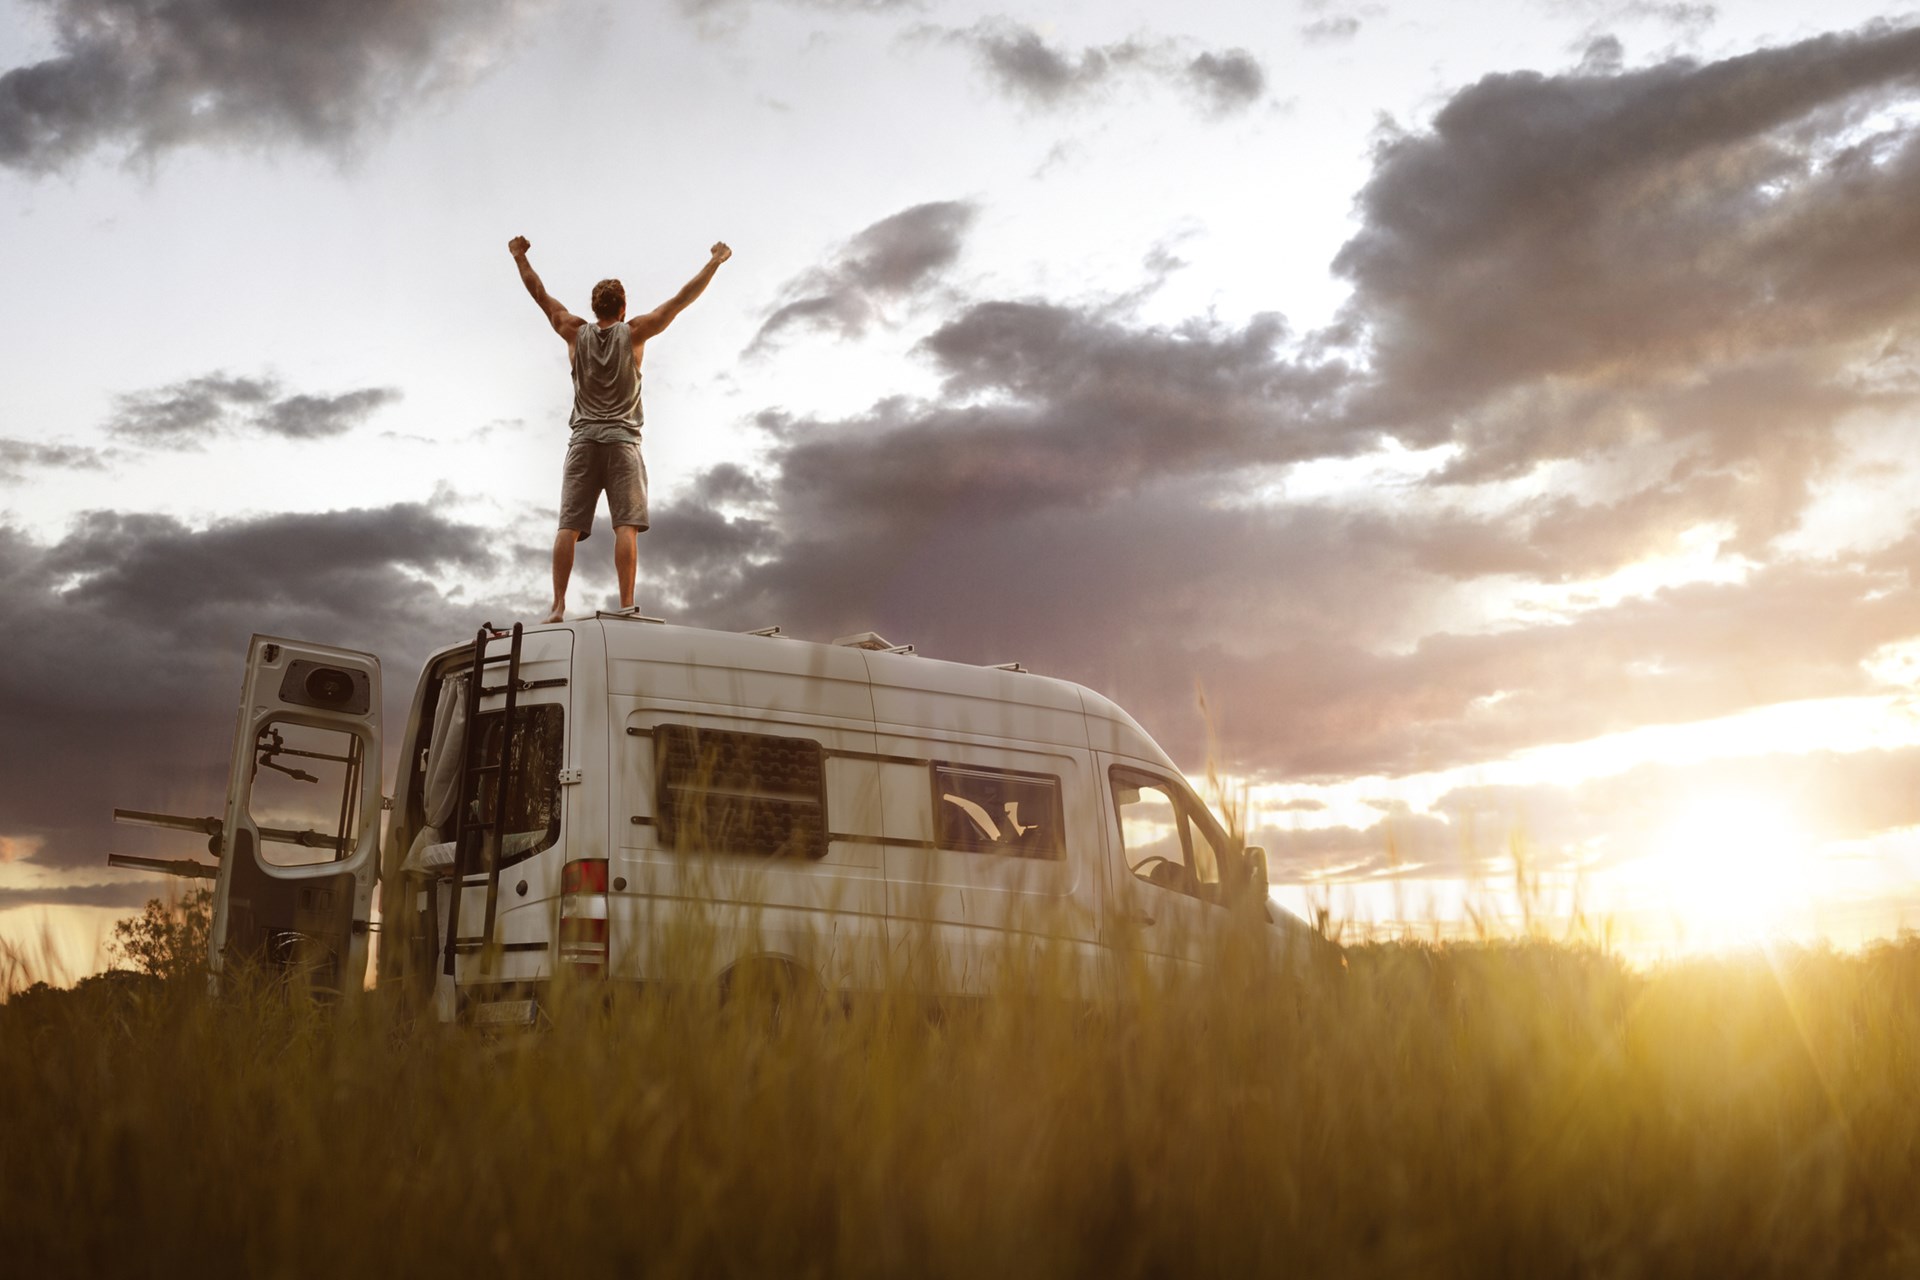 What do you really learn from six months of #vanlife?